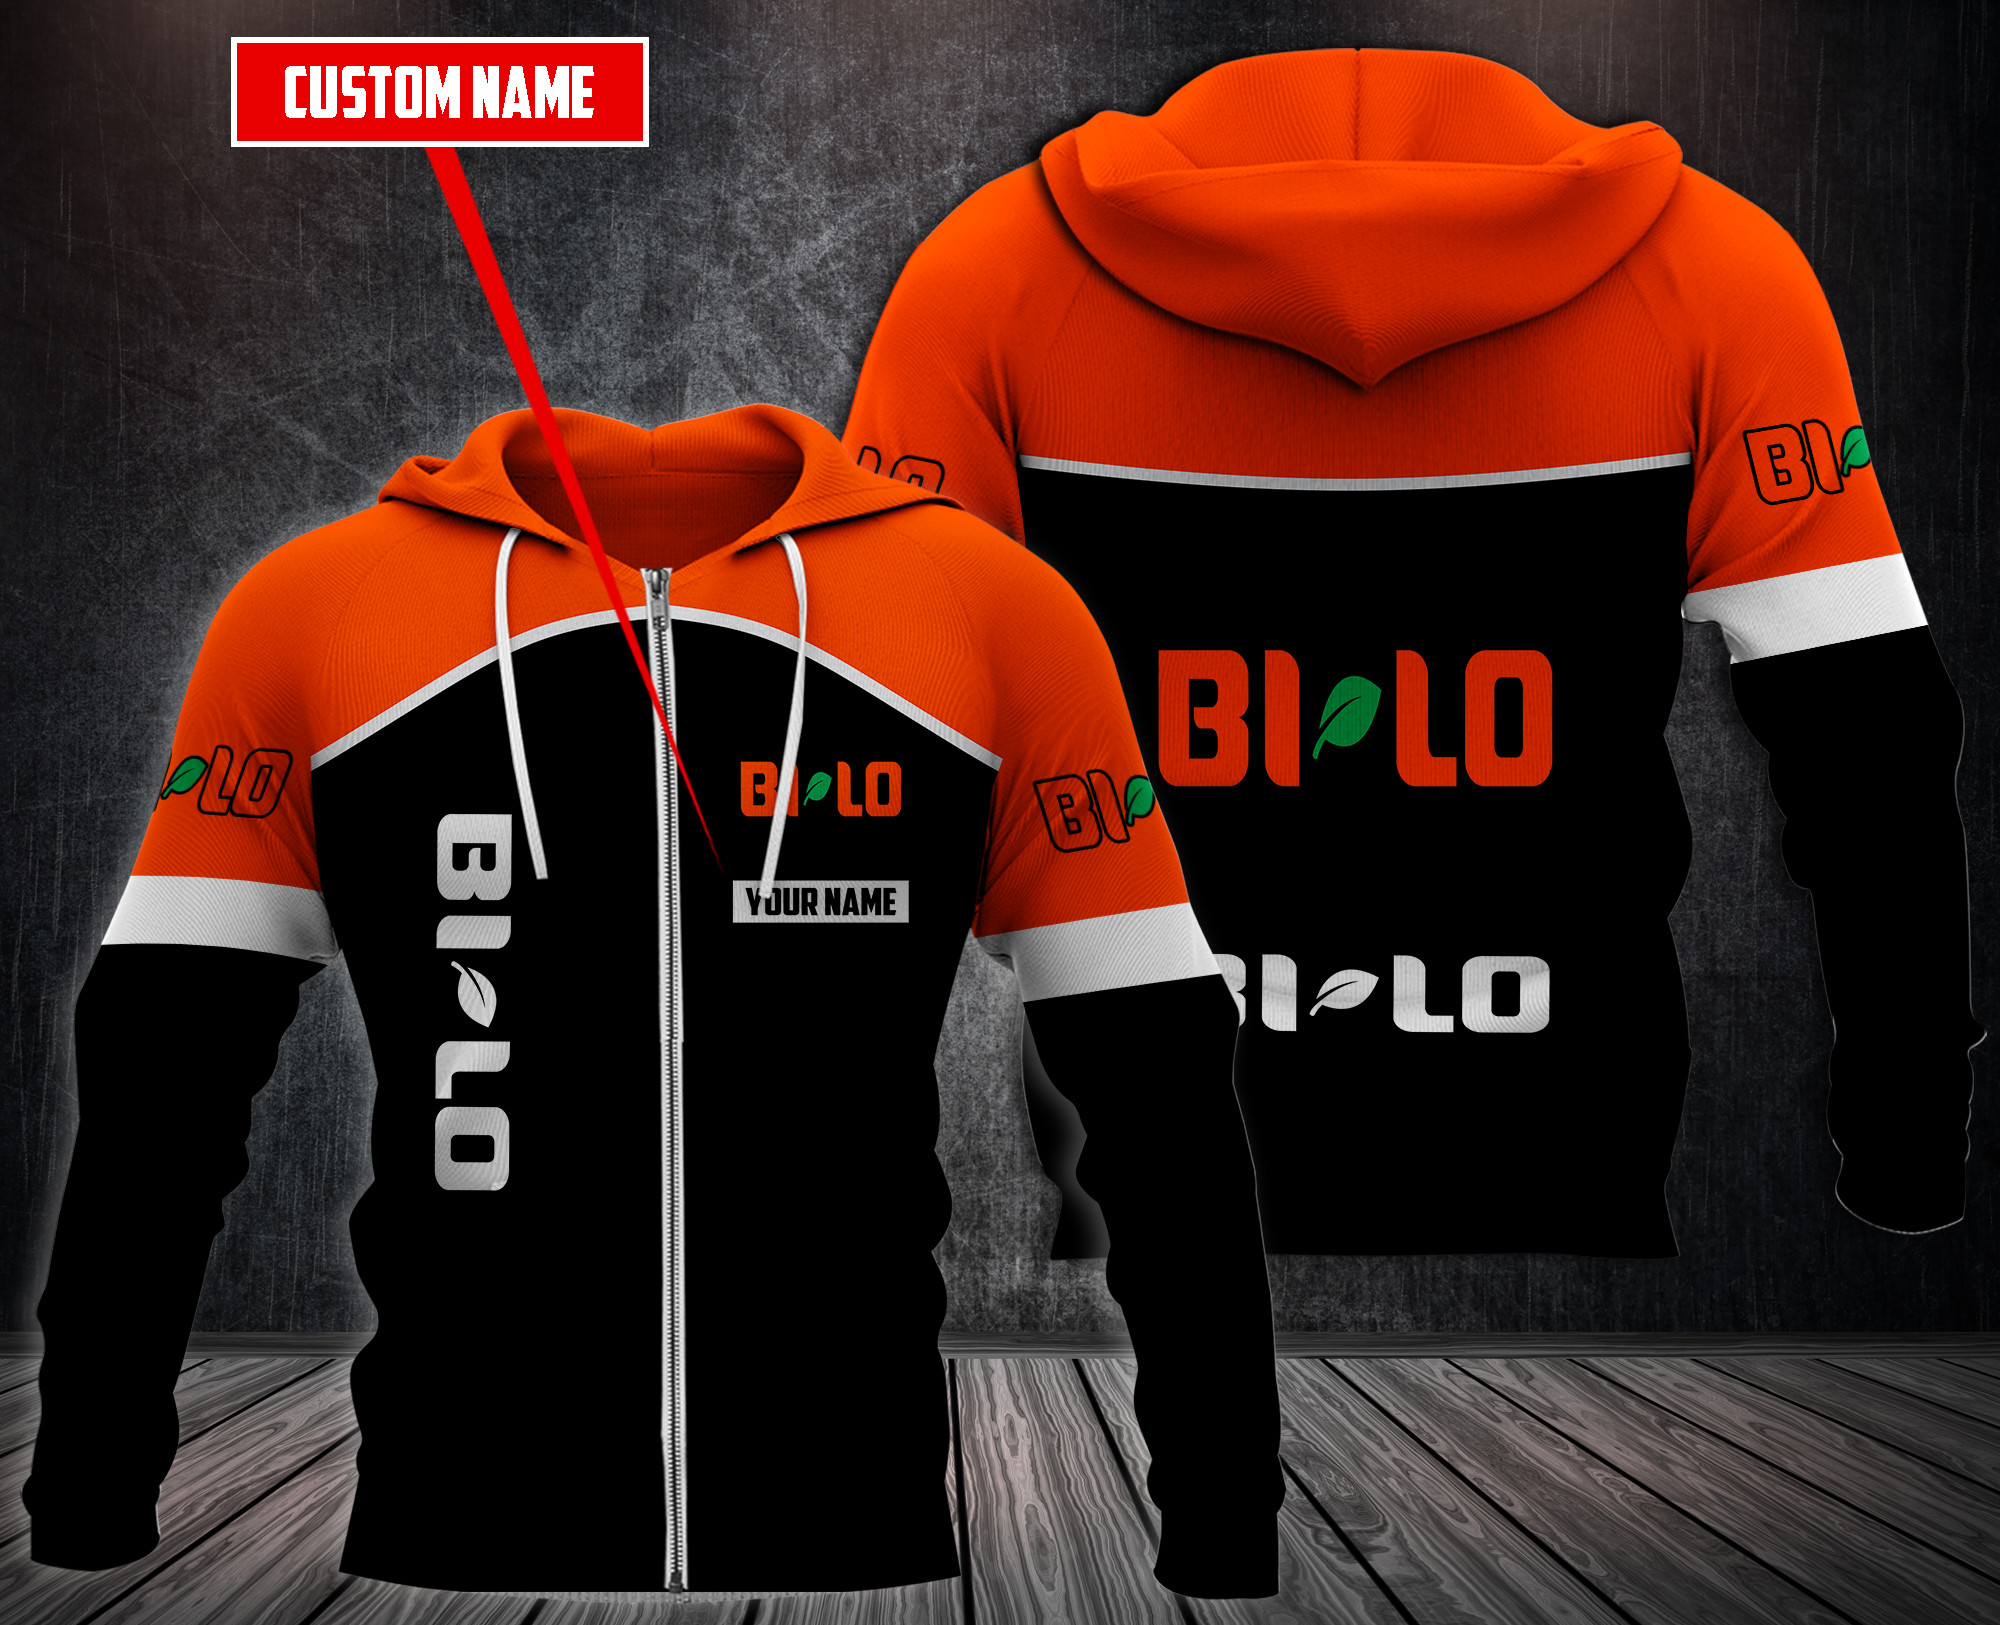 Choose the right hoodies for you on our boxboxshirt and ethershirt websites in 2022 51